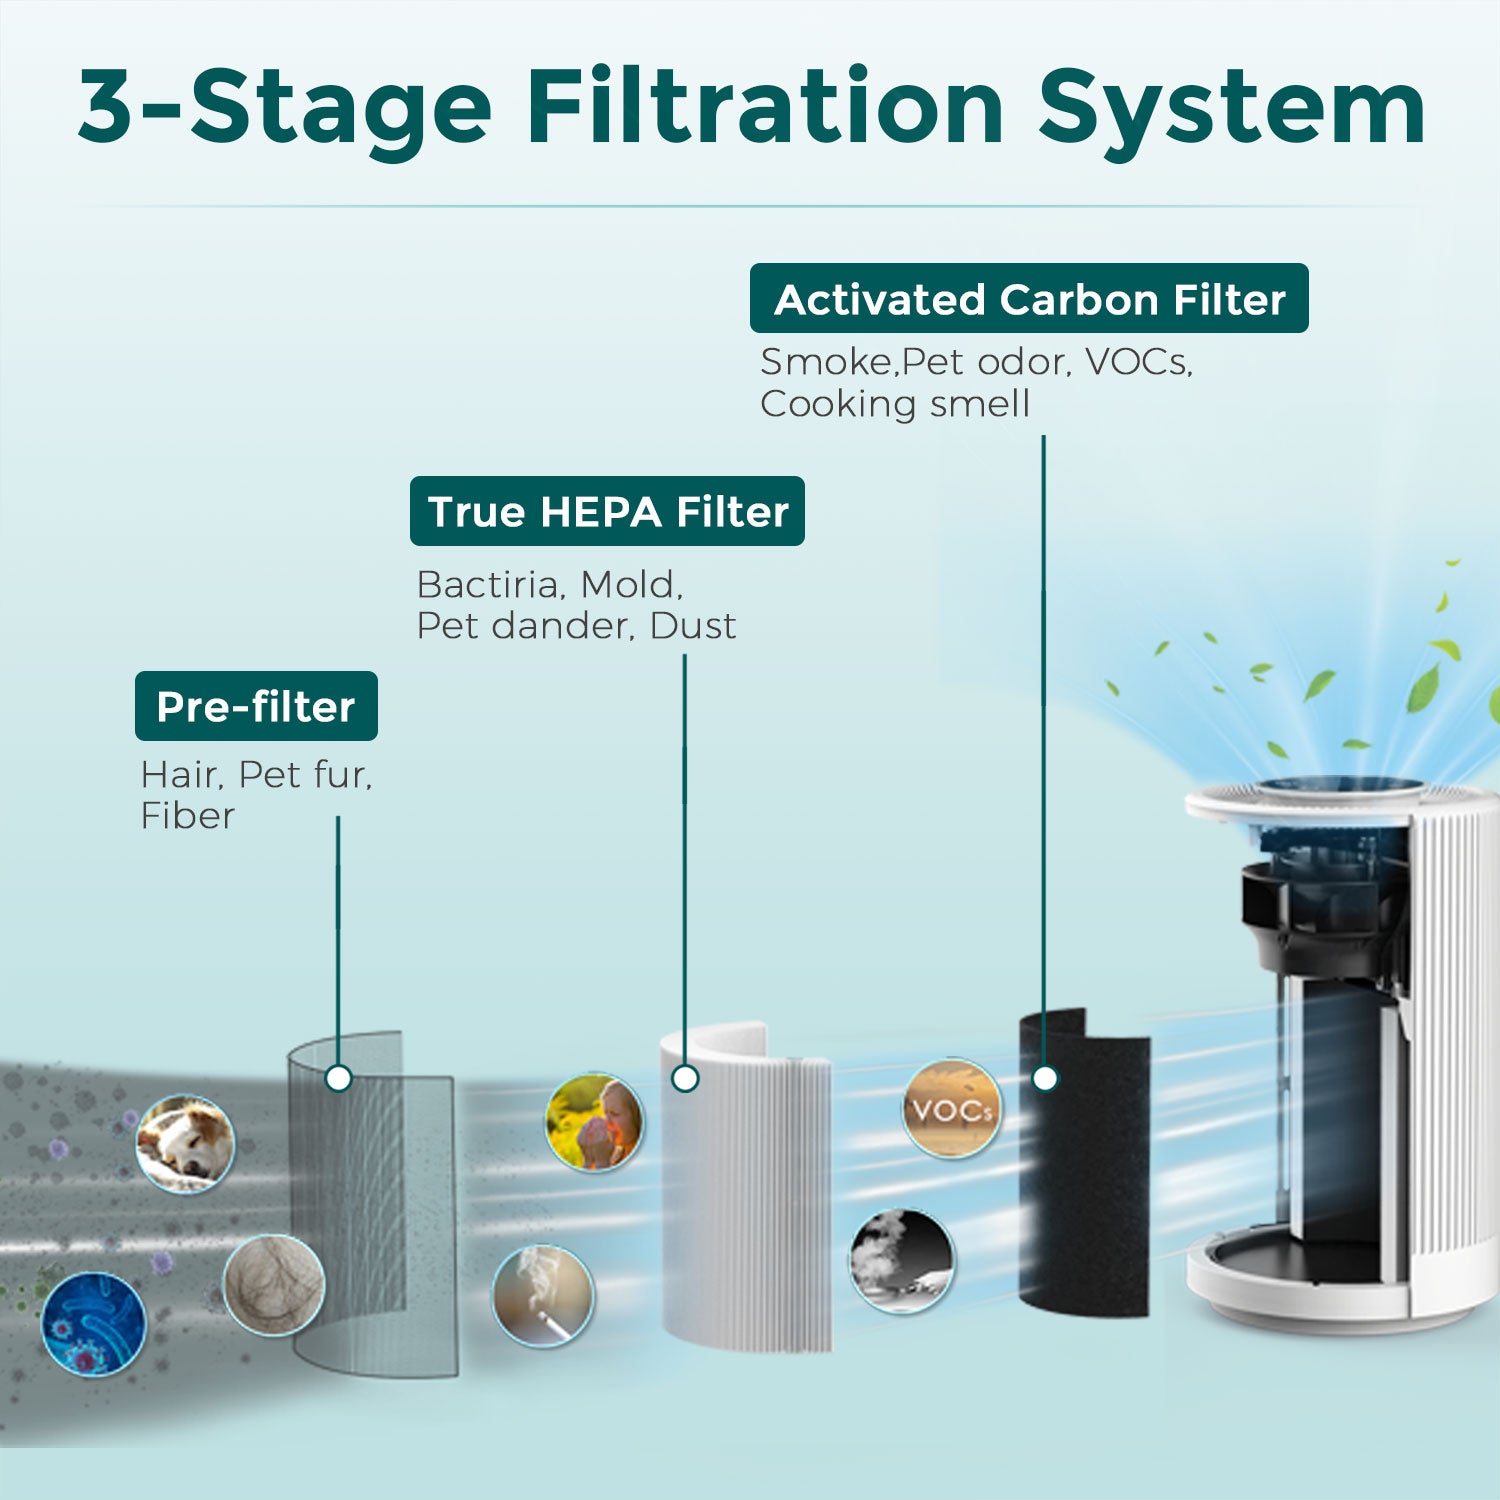 A Smoke Purification System Can Eliminate Smoke Odors and Particulate Matter